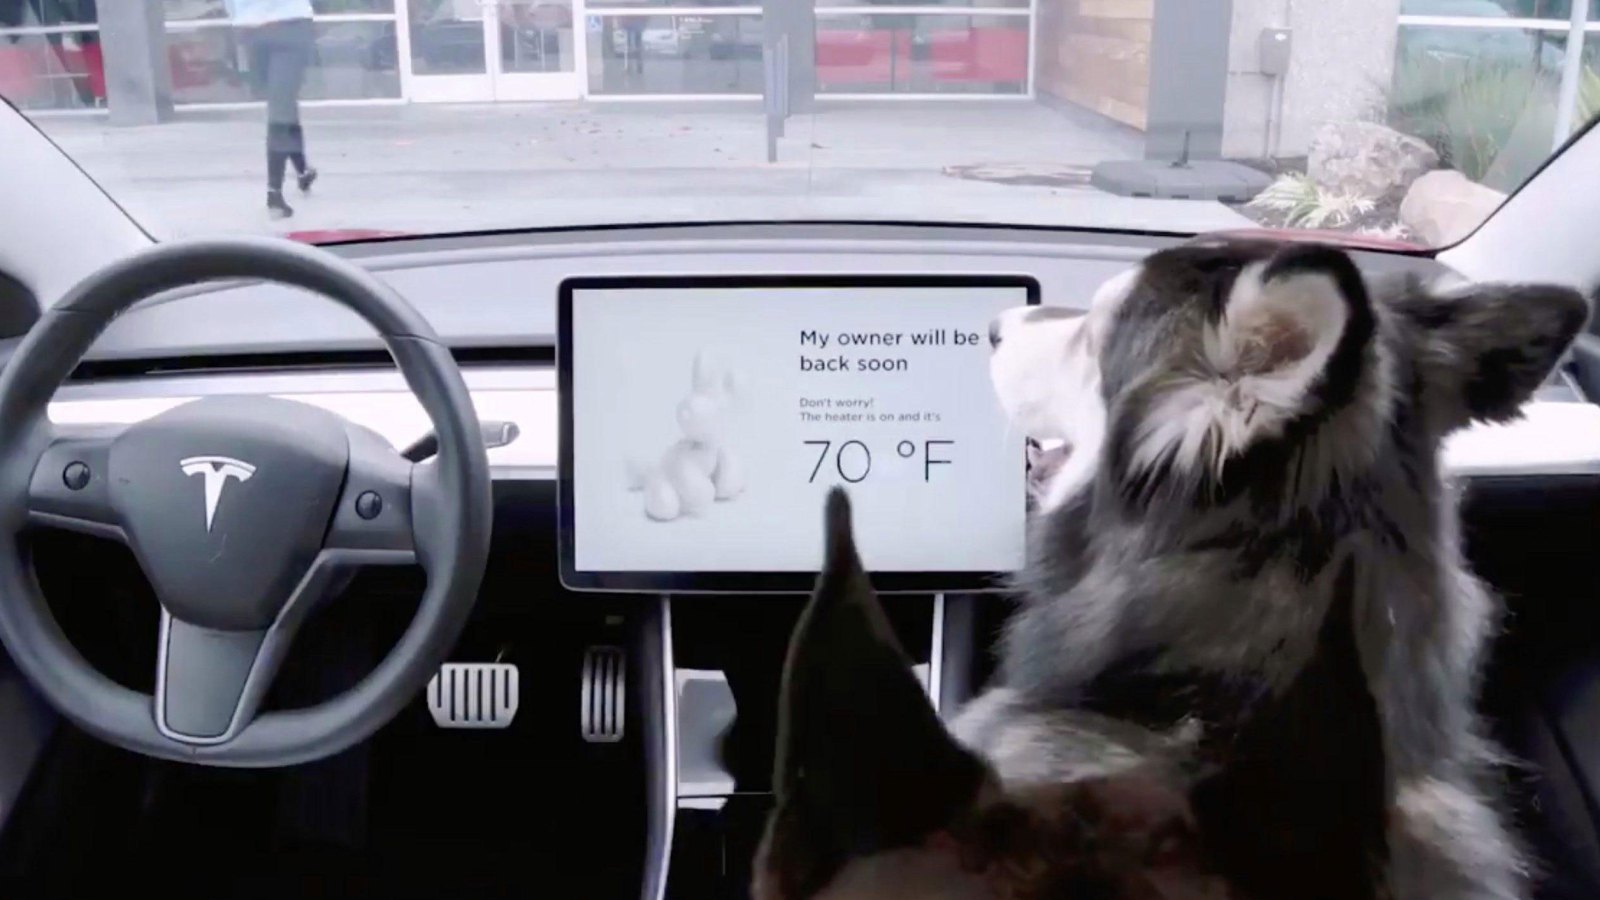 Tesla to Unveil ‘Dog Mode’ Feature That Will Allow Temperatures to Be Regulated for Pets Left in Cars